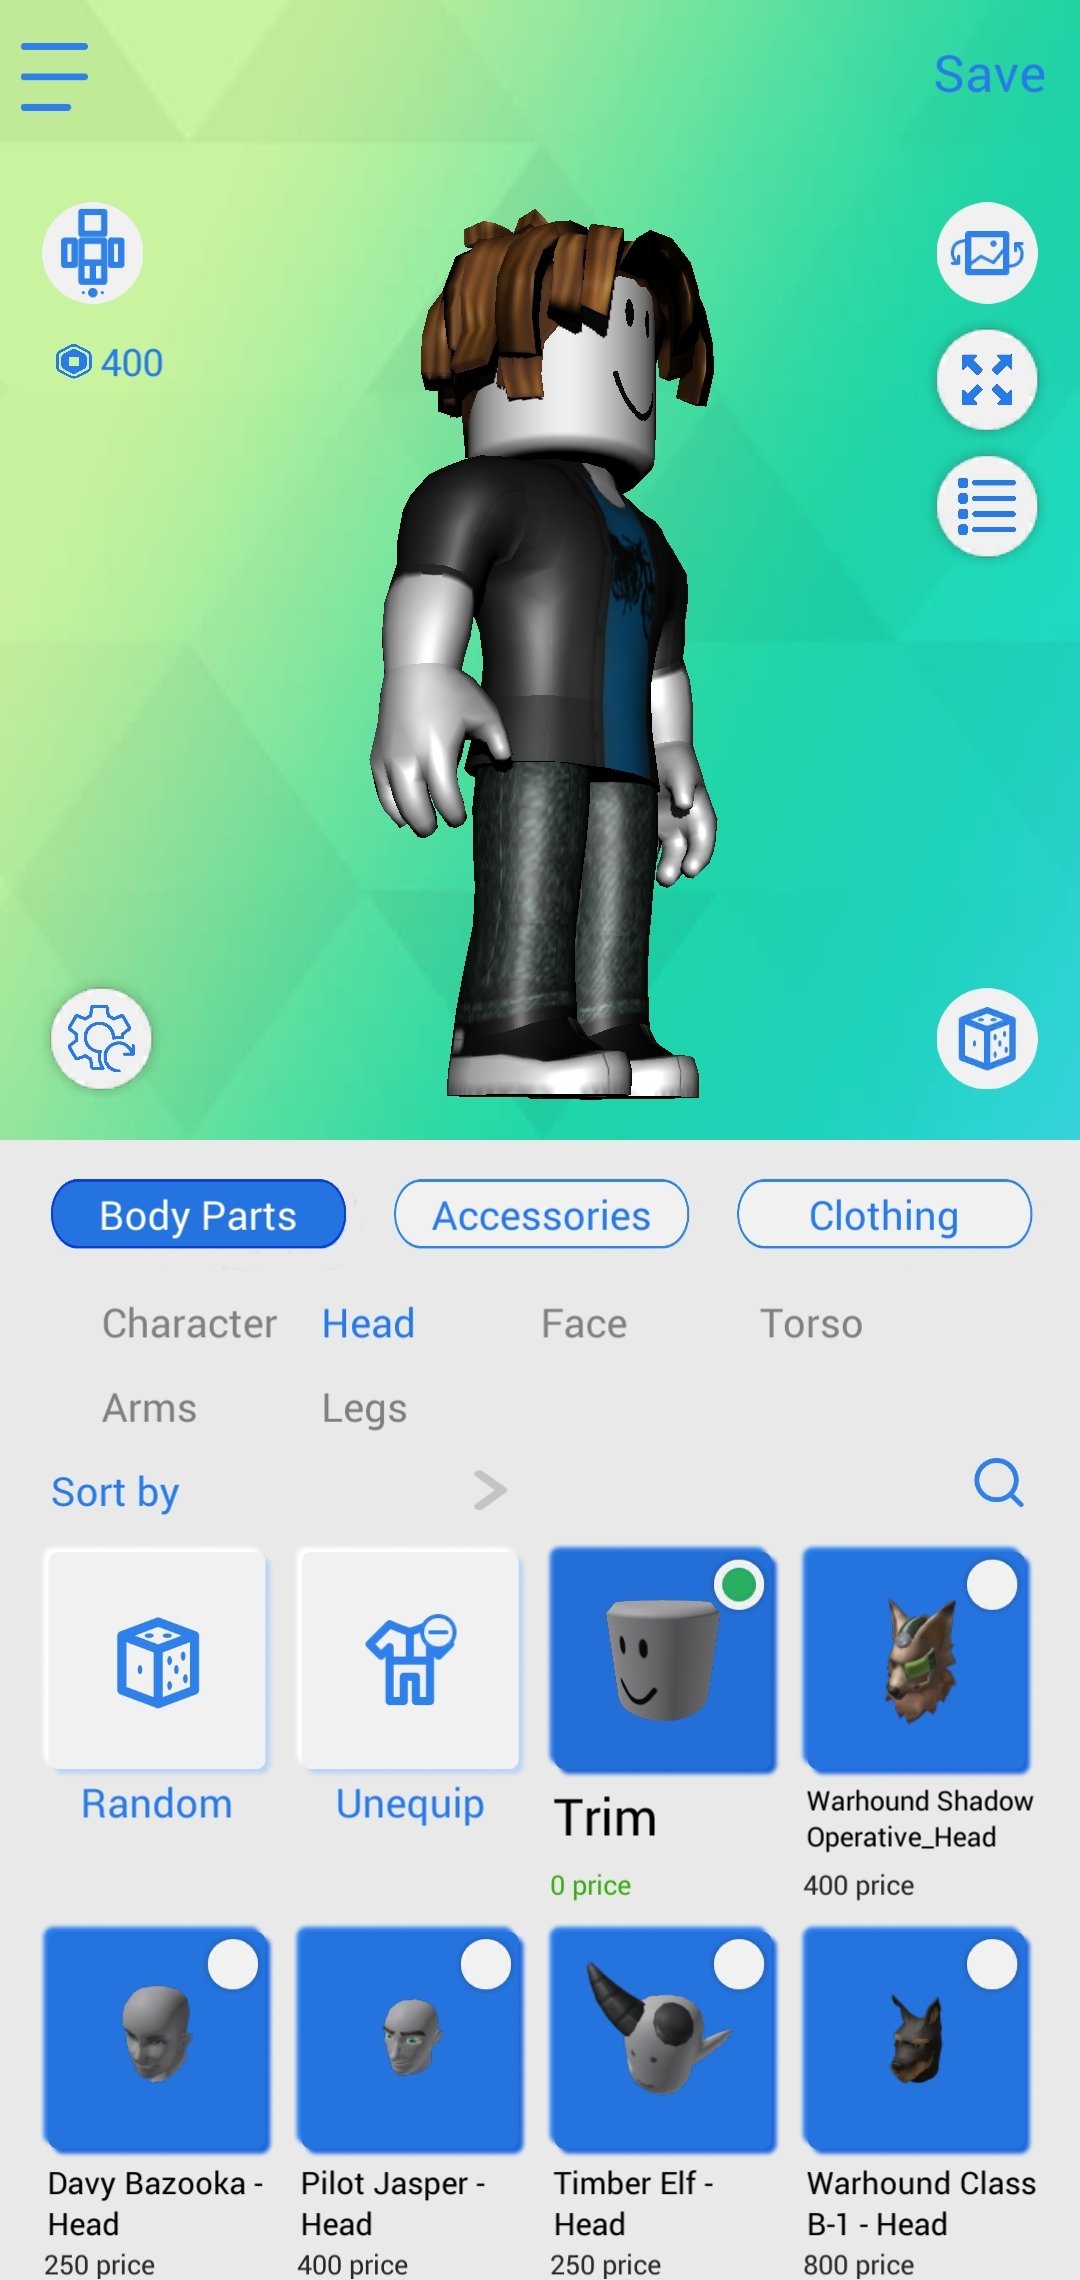 Master skins for Roblox v3.4.3 MOD APK -  - Android